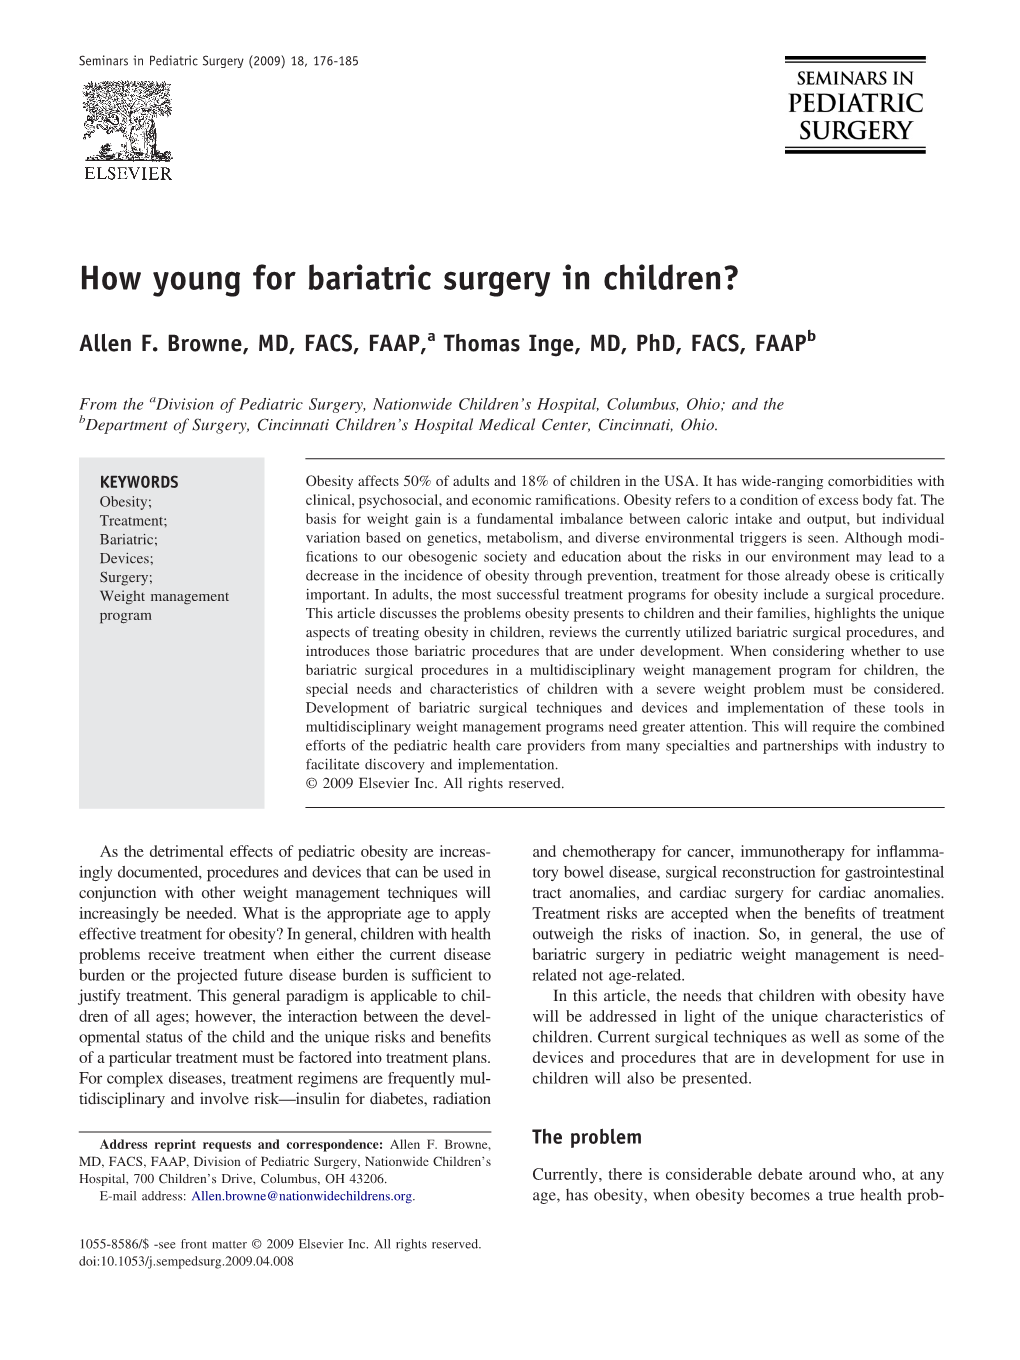 How Young for Bariatric Surgery in Children?